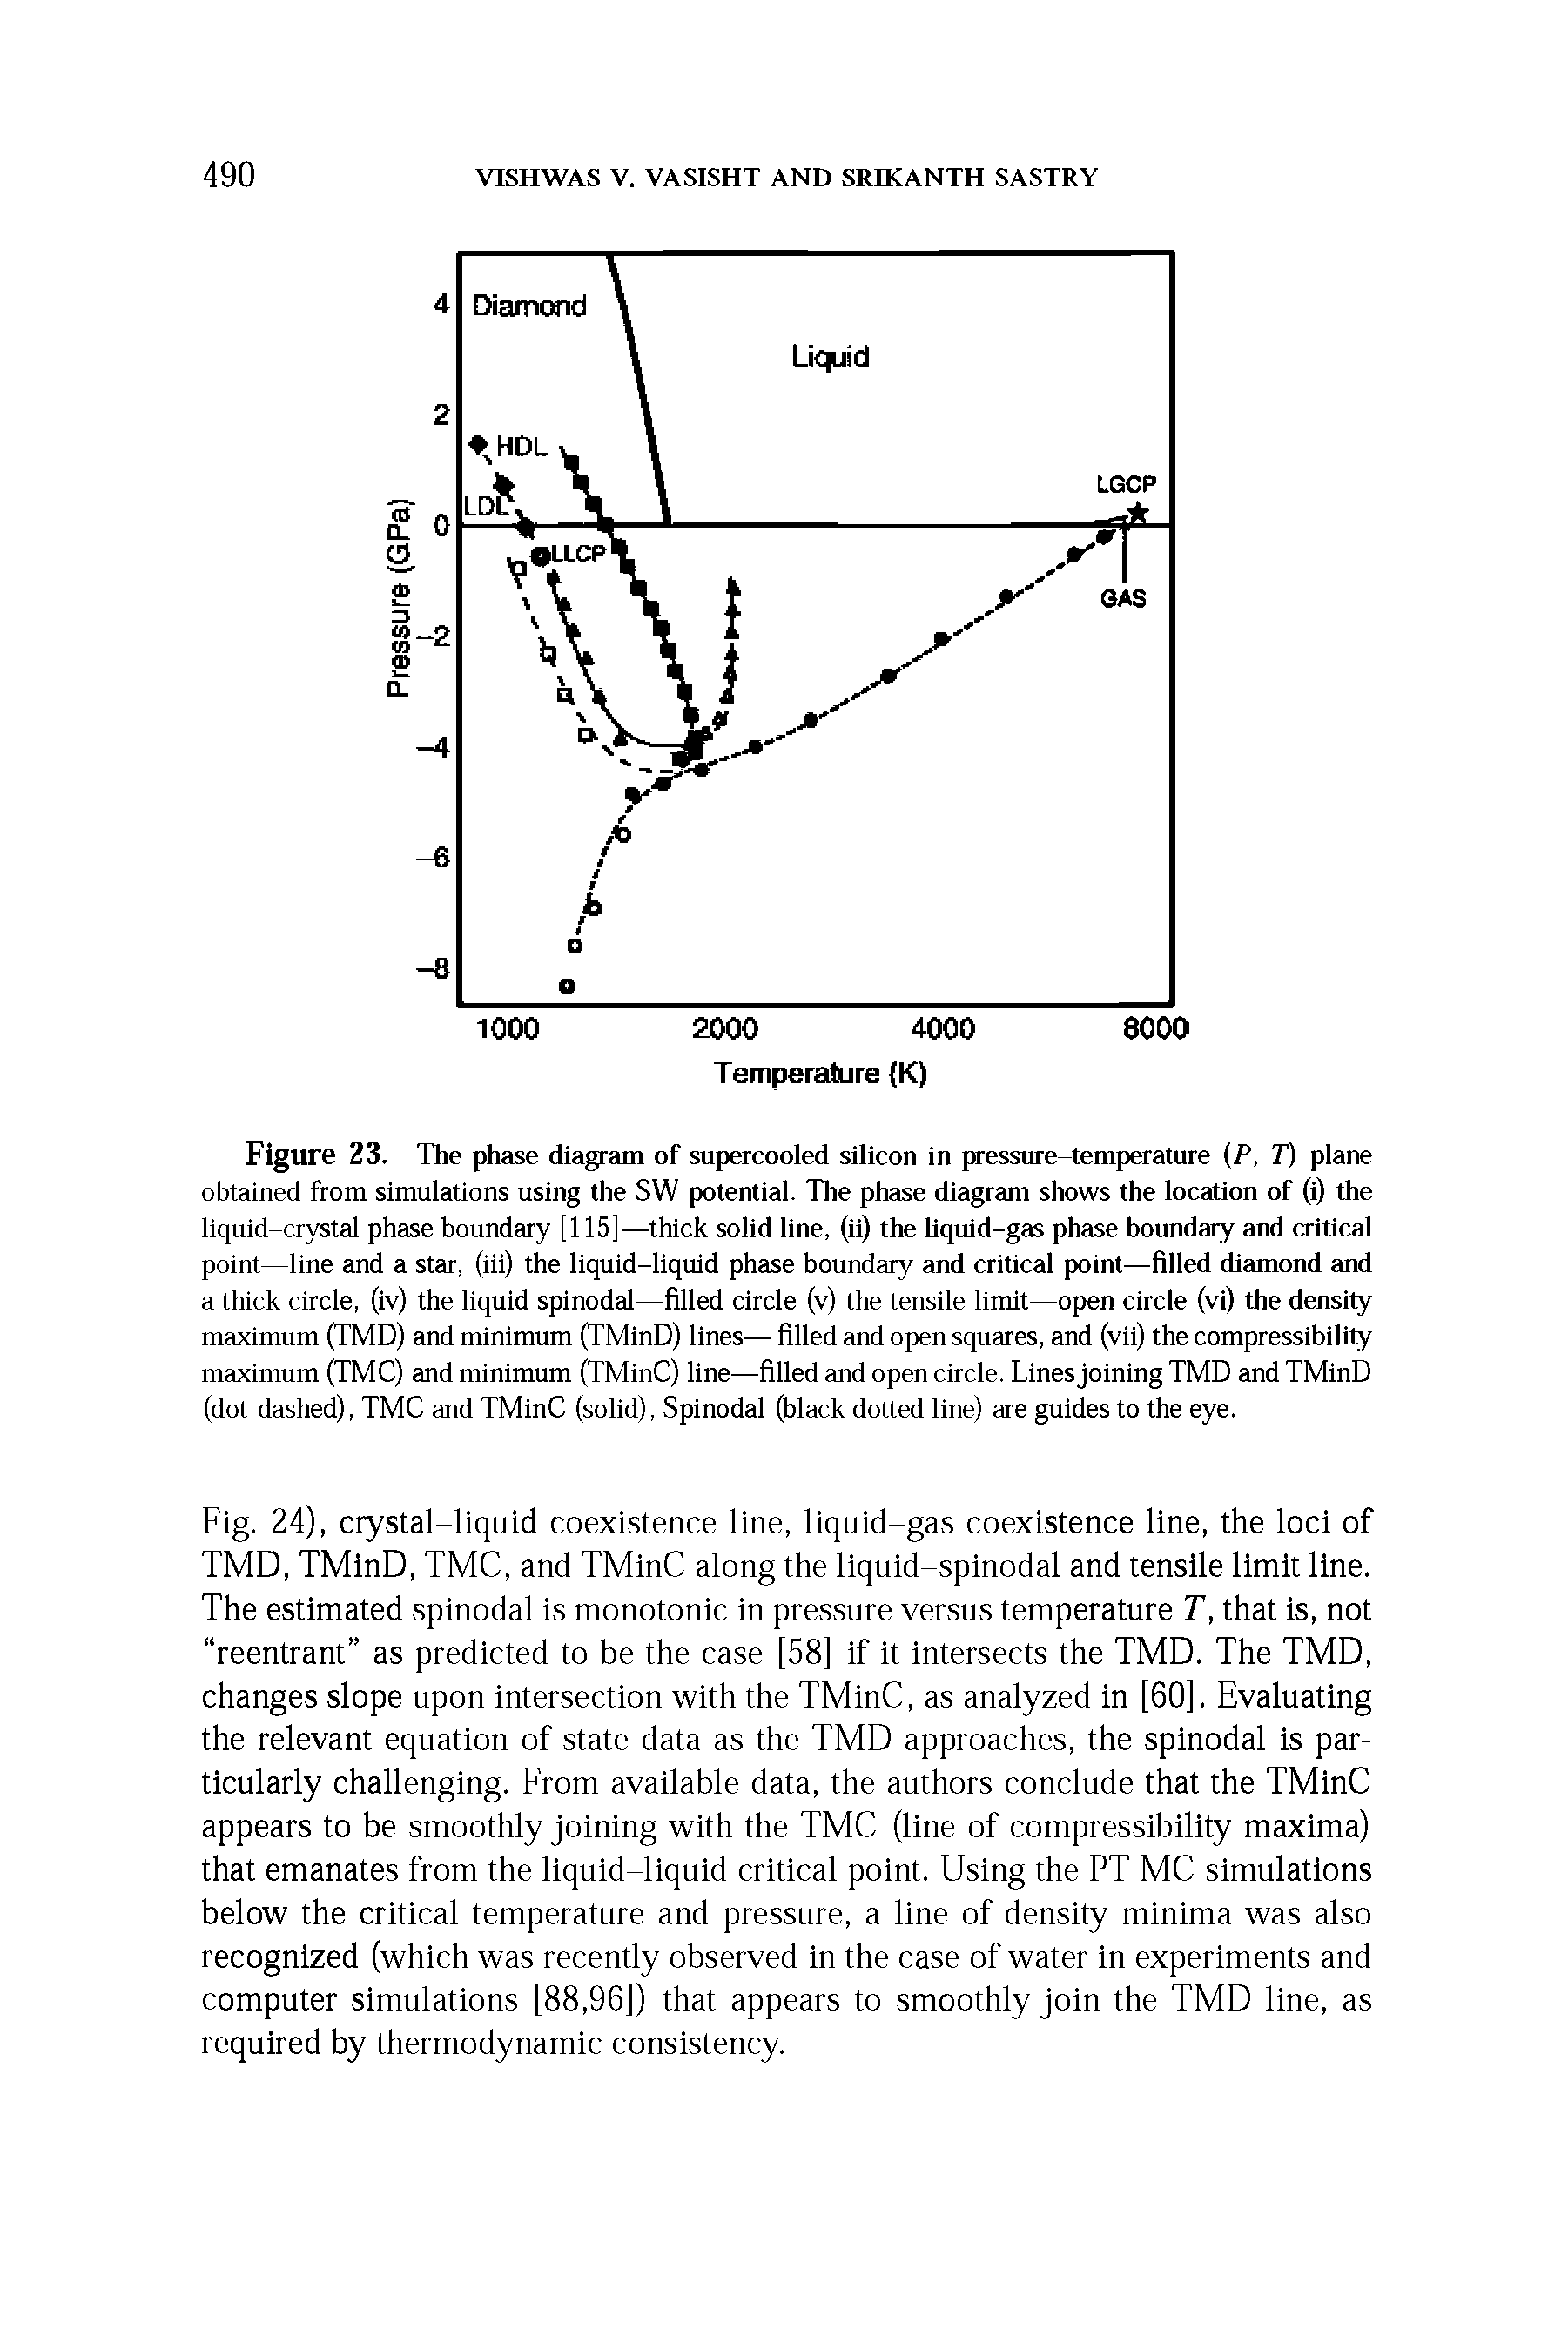 Figure 23. The ph ase diagram of supercooled silicon in pressure temperature (P, T) plane obtained from simulations using the SW potential. The phase diagram shows the location of (i) the liquid-crystal phase boundary [115]—thick solid line, (ii) the liquid-gas phase boundary and critical point—line and a star, (iii) the liquid-liquid phase boundaiy and critical point—filled diamond and a thick circle, (iv) the liquid splnodal—filled circle (v) the tensile limit—open circle (vi) the density maximum (TMD) and minimum (TMinD) lines— filled and open squares, and (vii) the compressibility maximum (TMC) and minimum (TMinC) line—filled and open circle. Lines joining TMD and TMinD (dot-dashed), TMC and TMinC (solid), Spinodal (black dotted line) are guides to the eye.